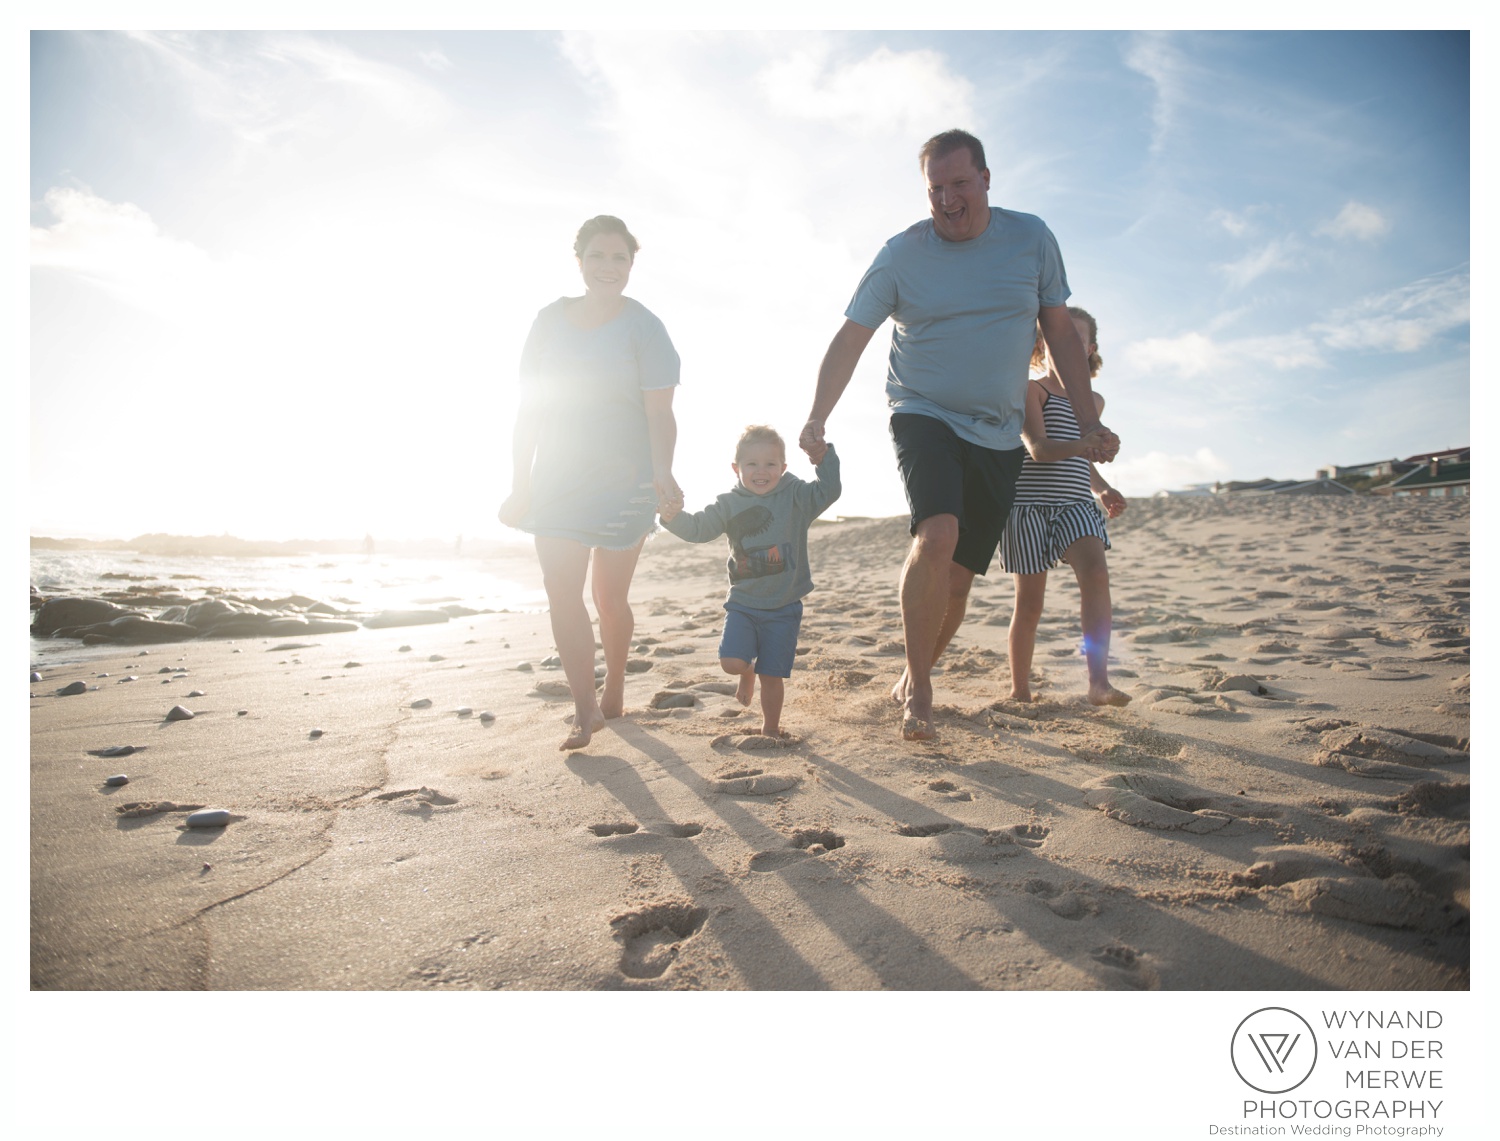 Super cute and beautiful family photos of Ruth du Toit and her family